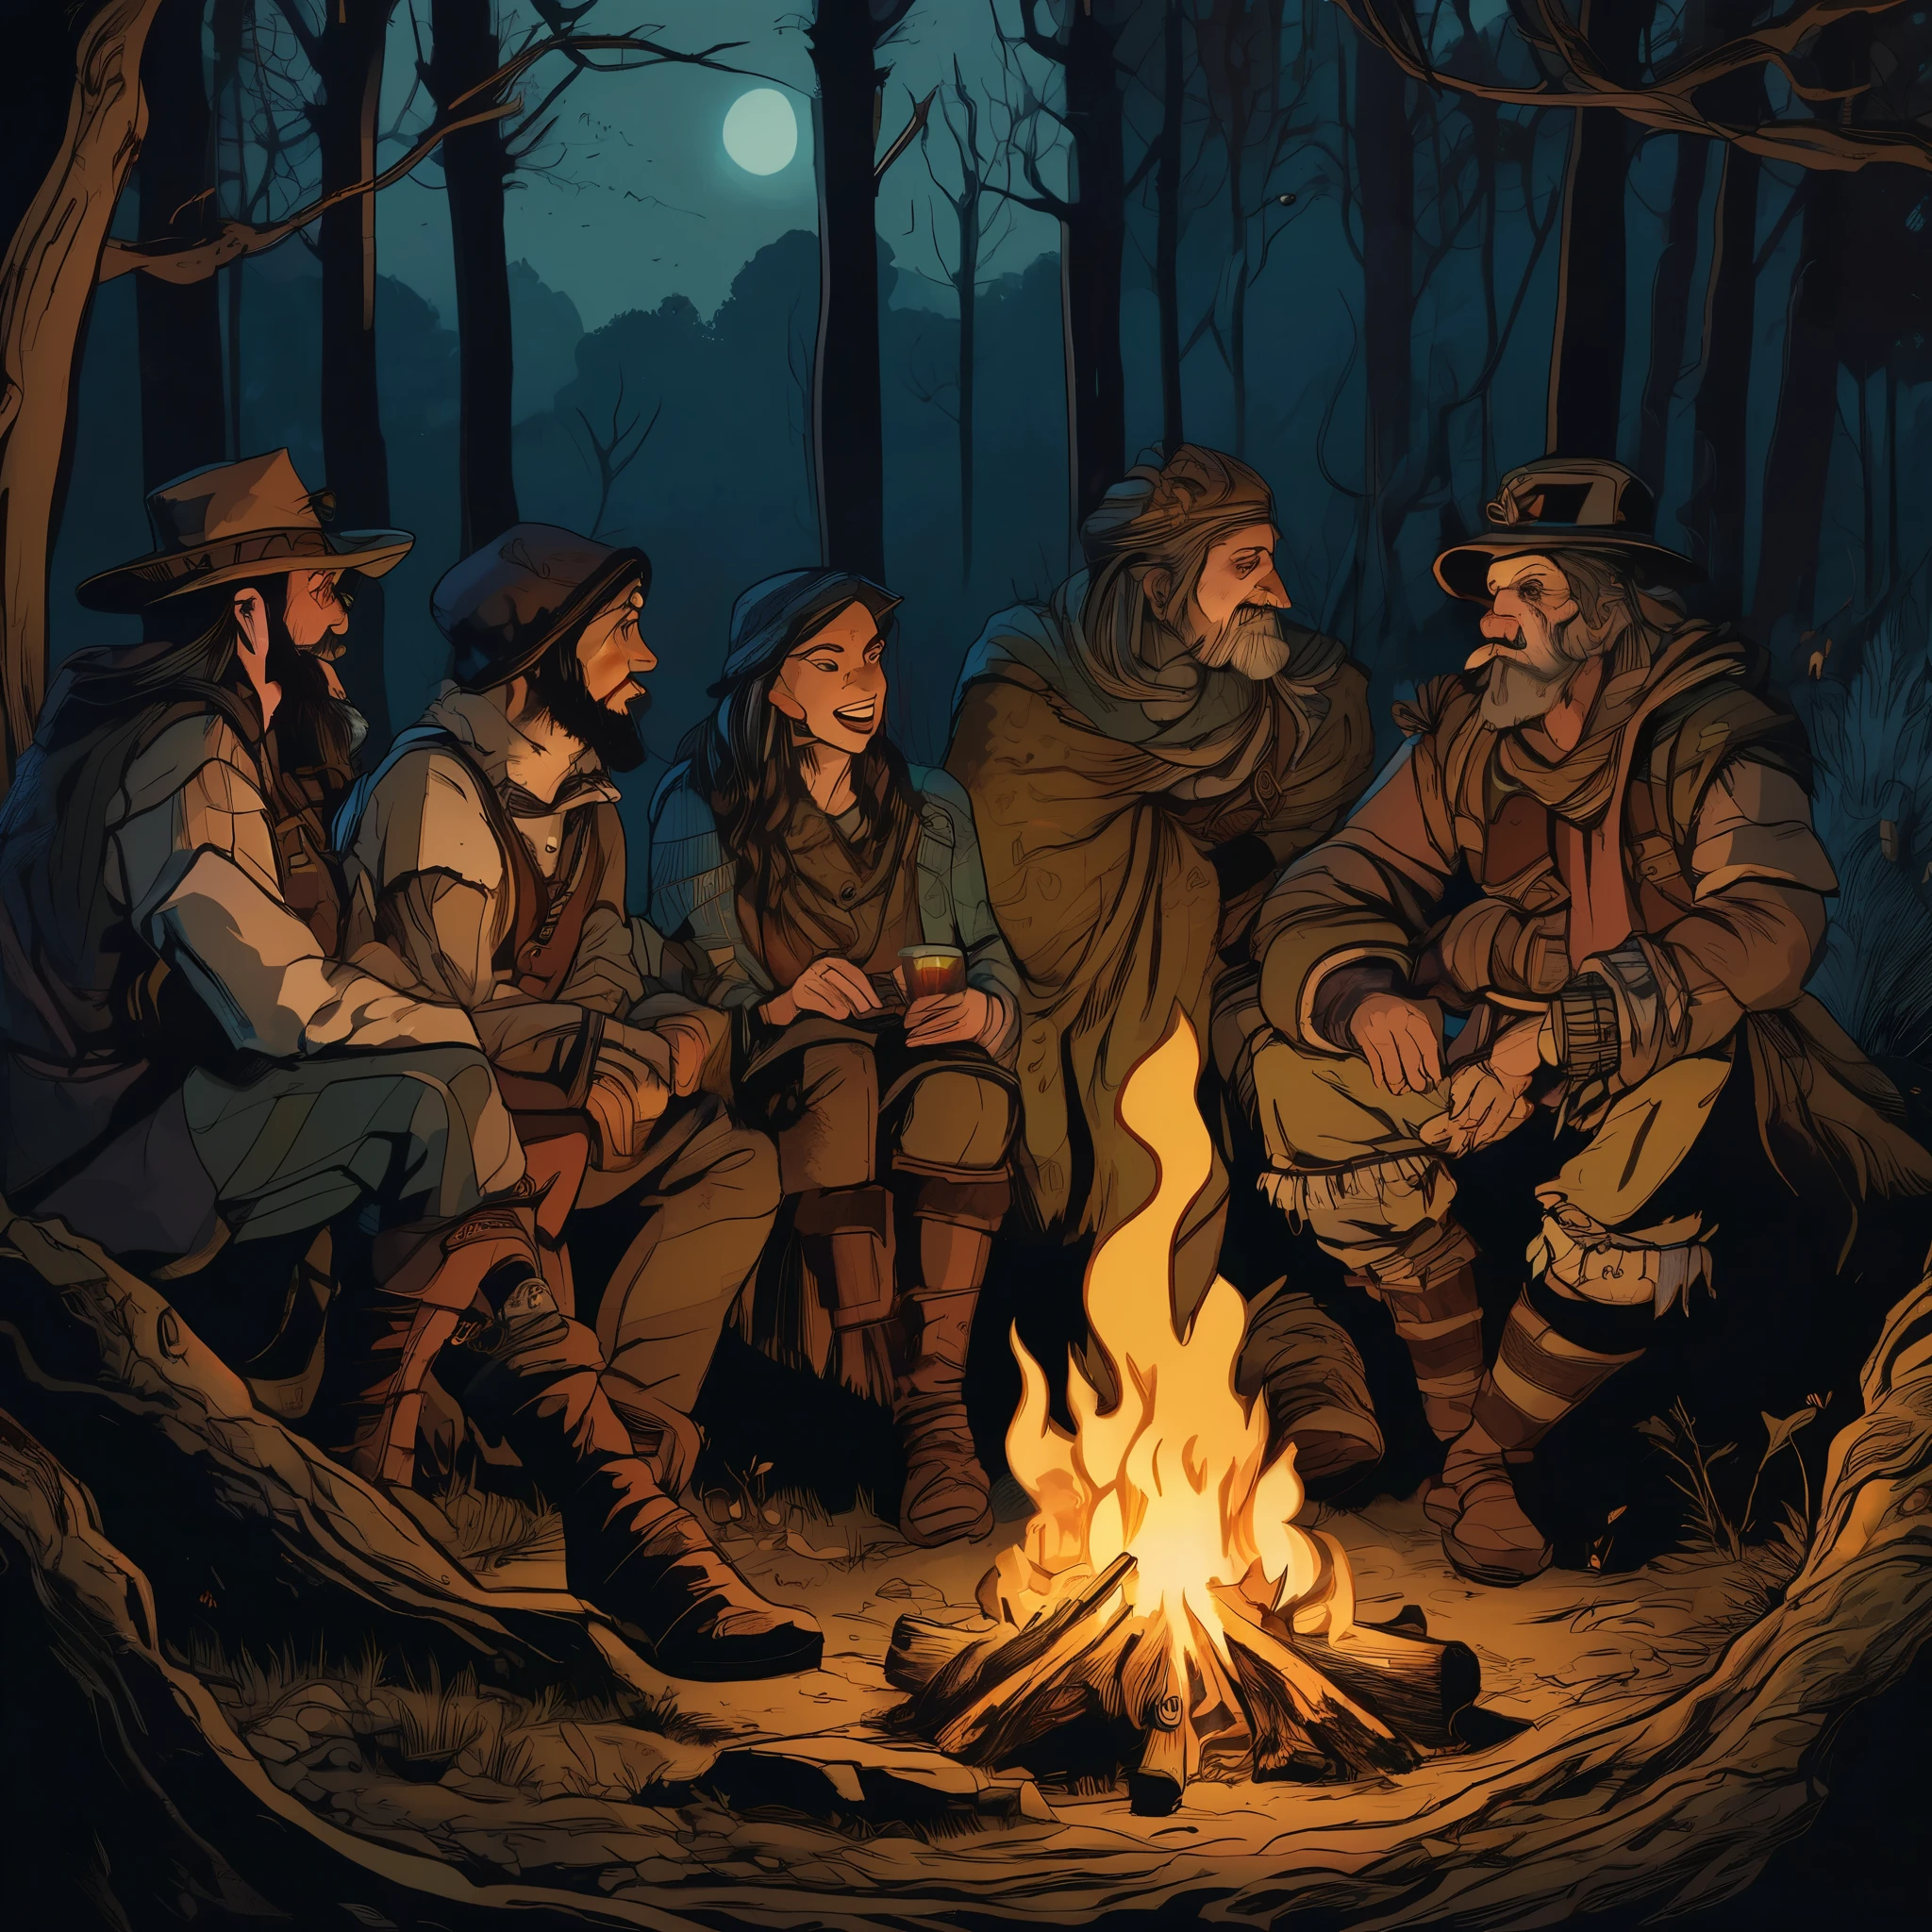 (a group of fantasy adventurers sitting close to a campfire,drinking mead and telling tall tales),(fantasy,adventurer,group:1.1),(campfire:1.1,fire),(mead,drinking:1.1),(telling tall tales:1.1),(haunted woods,woods,forest),(gleaming eyes:1.1,watching hungrily,hungry eyes,eyes in the darkness:1.2),(fantasy creatures,creatures,monsters),(darkness:1.1,eerie),(mysterious atmosphere:1.1),(mysterious sounds,sounds),(flickering firelight:1.1),(distant howls),(mystical:1.1,enchanted),(medieval setting:1.1),(moonlit),(adventure:1.1,exciting),(magic:1.1),unpredictable), (fantastical:1.1),(mystic:1.1)